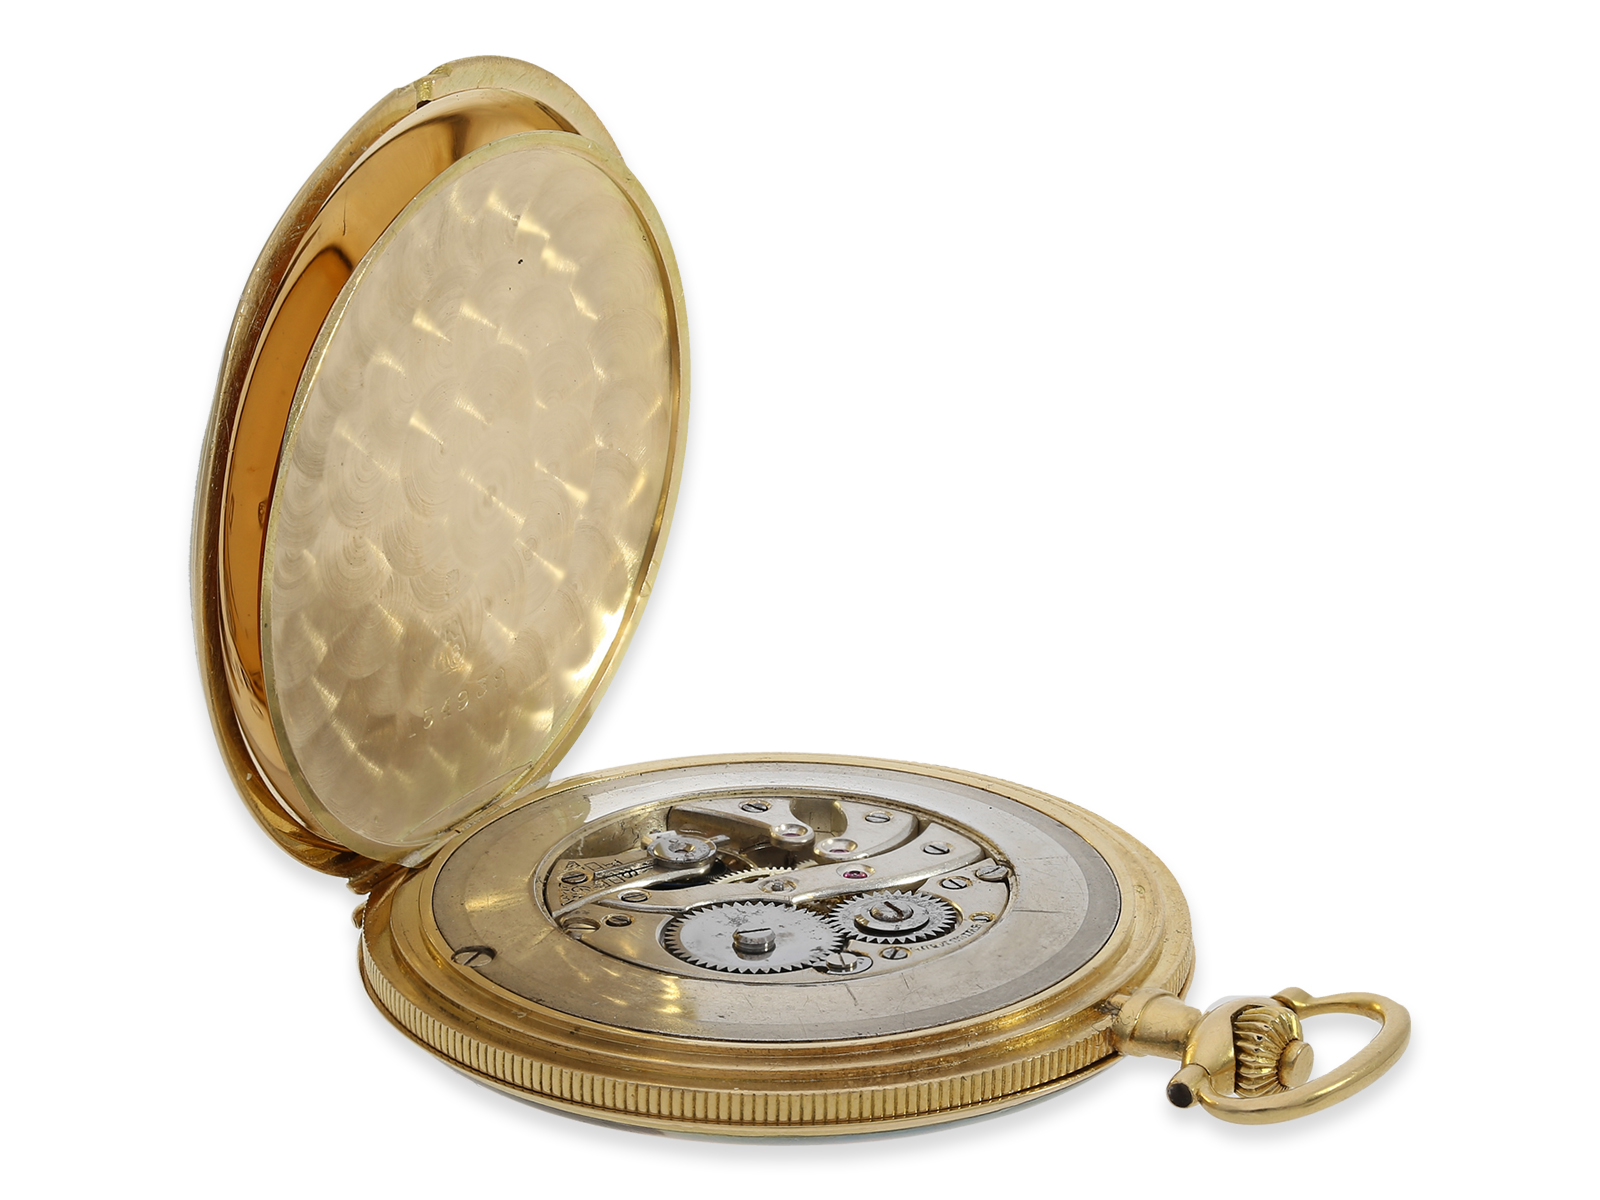 Pocket watch: extremely rare gold/enamel hunting case watch for the Indian market with representatio - Image 5 of 8